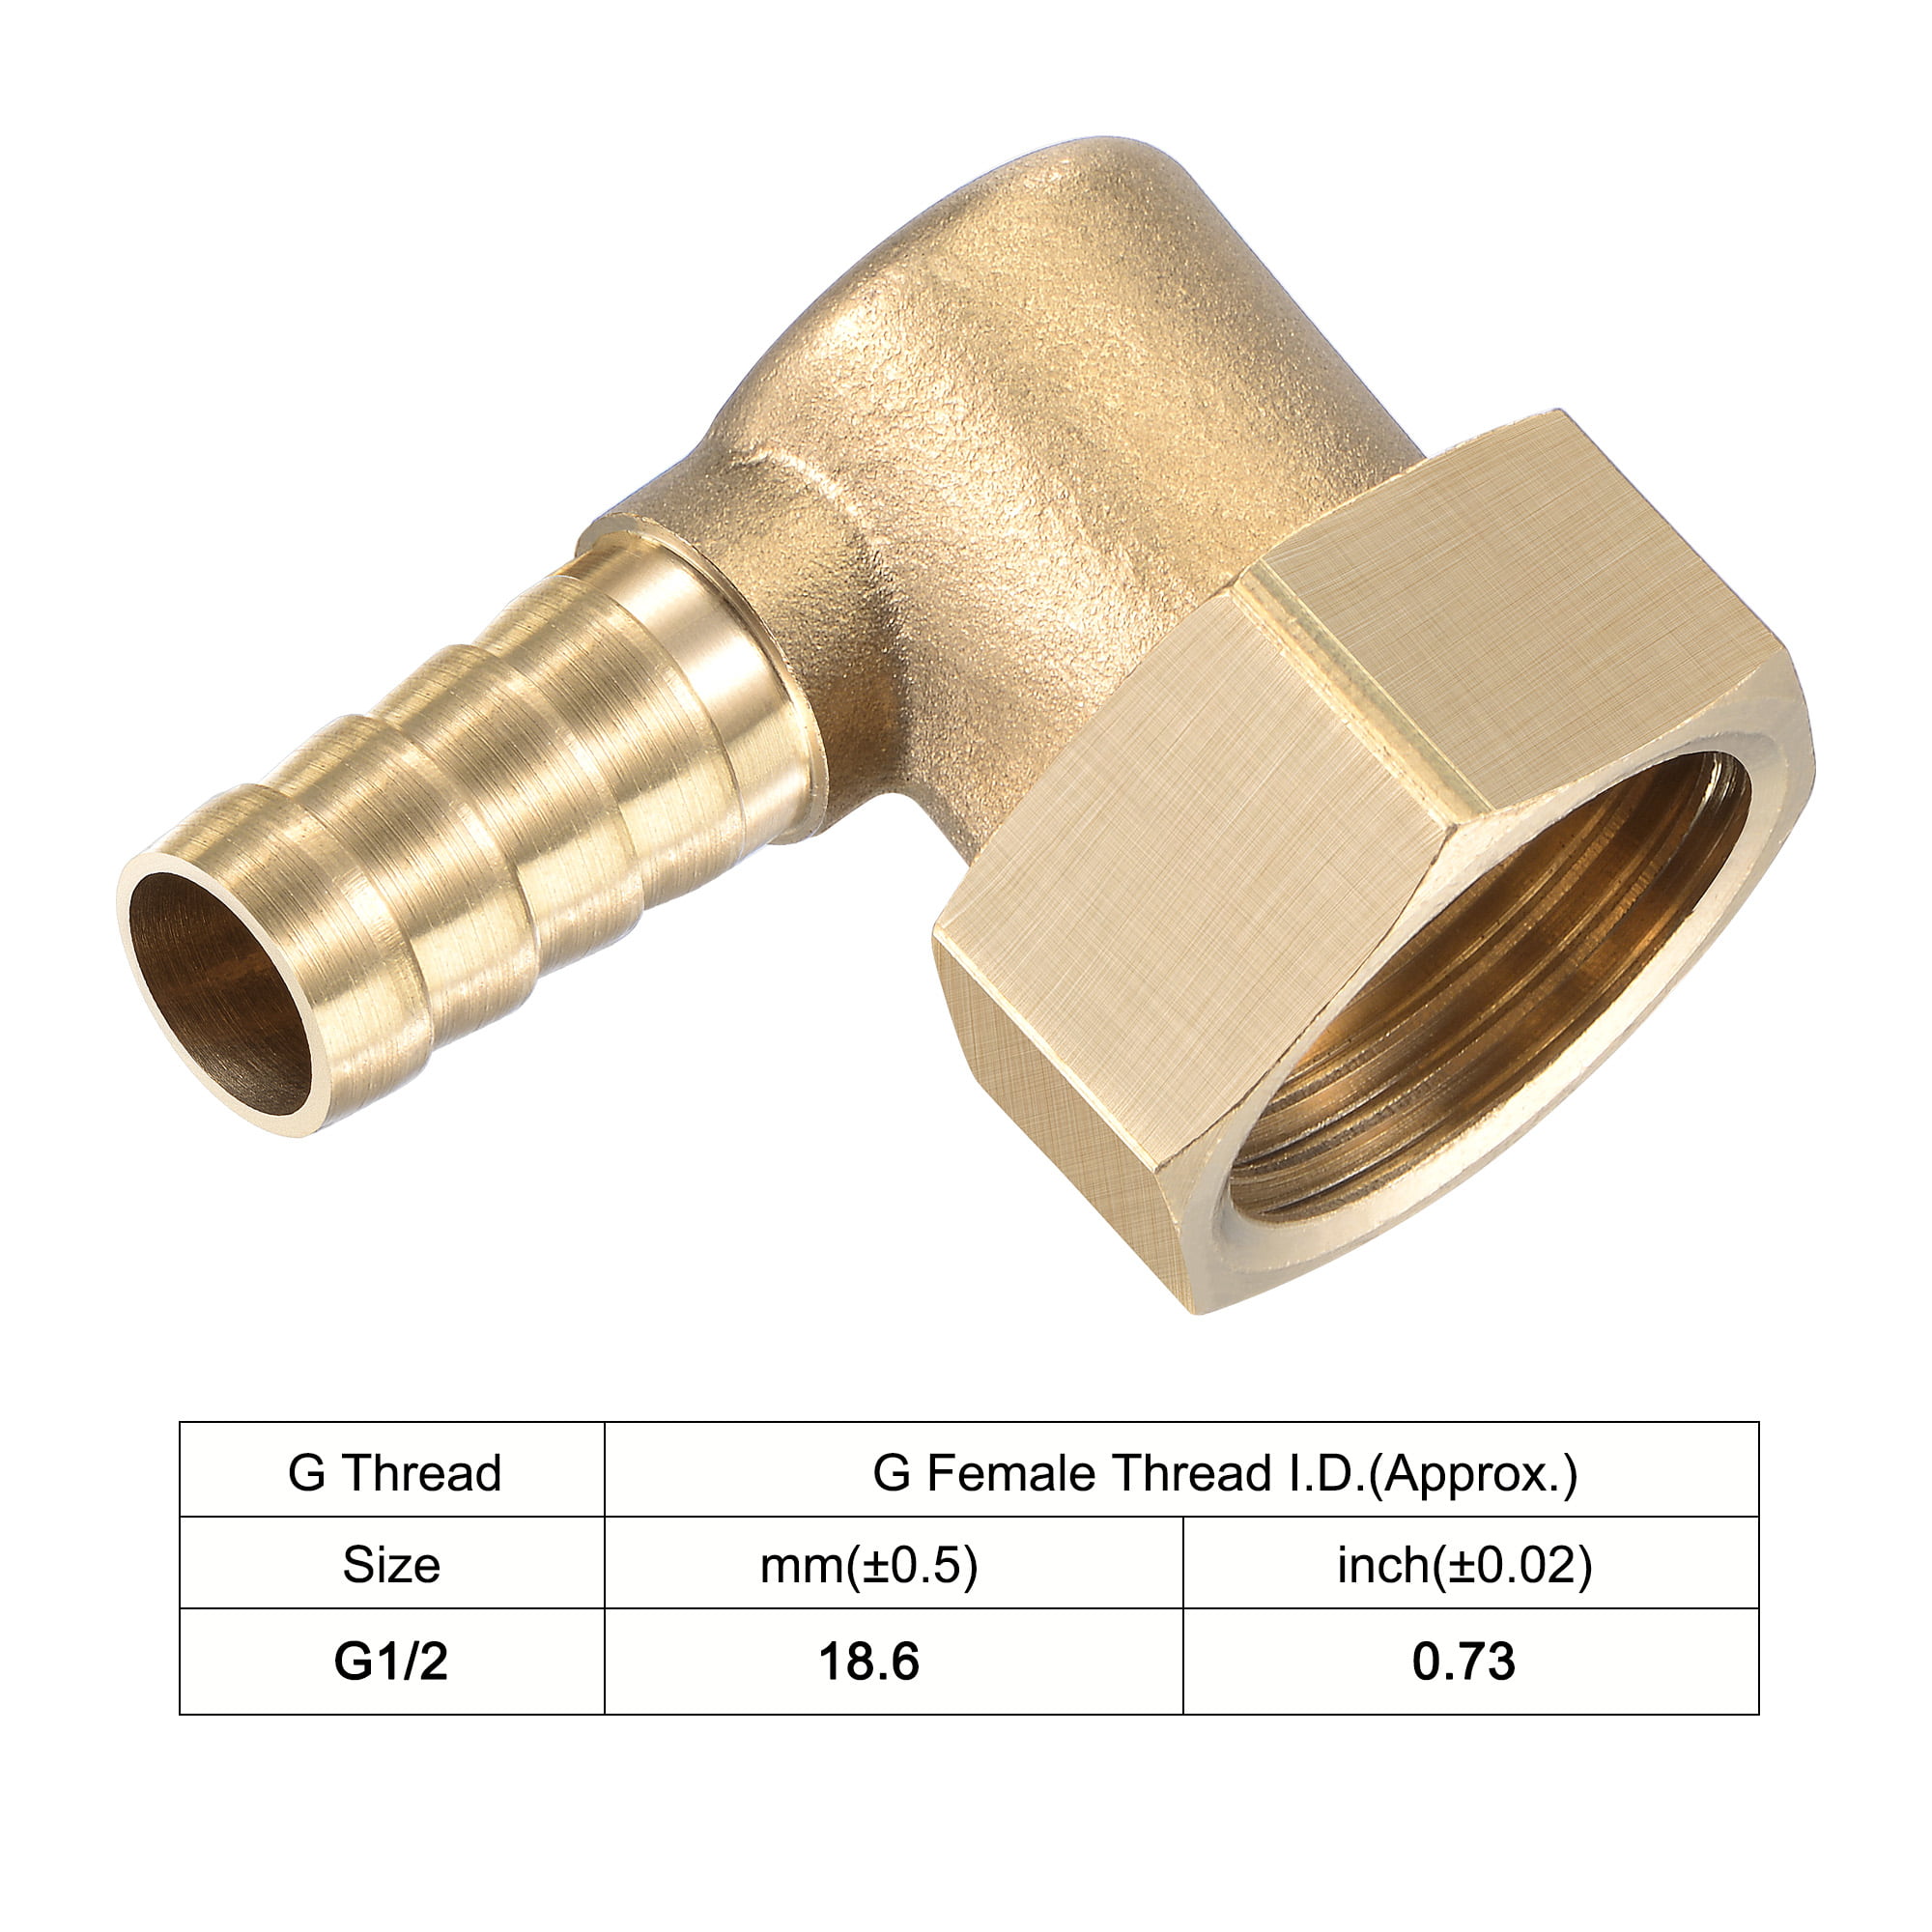 2pcs Brass Hose Barb Fitting Elbow 4mm x G1/2 Female Swivel Nut Pipe Connectors 